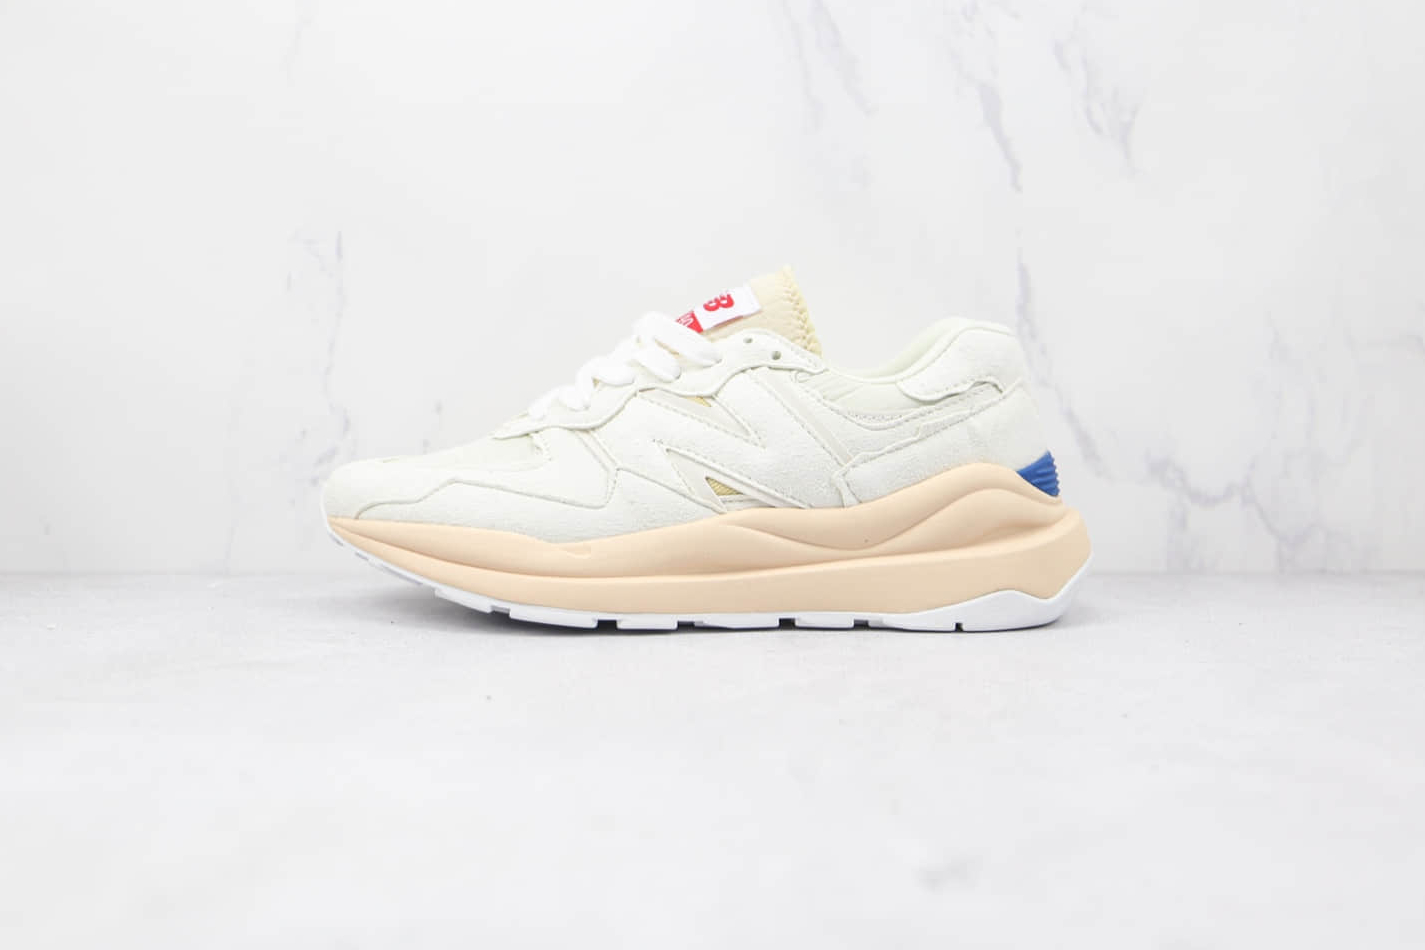 New Balance 57 40 'Protection Pack - Sea Salt' M5740DMP - Stylish and Durable Sneakers